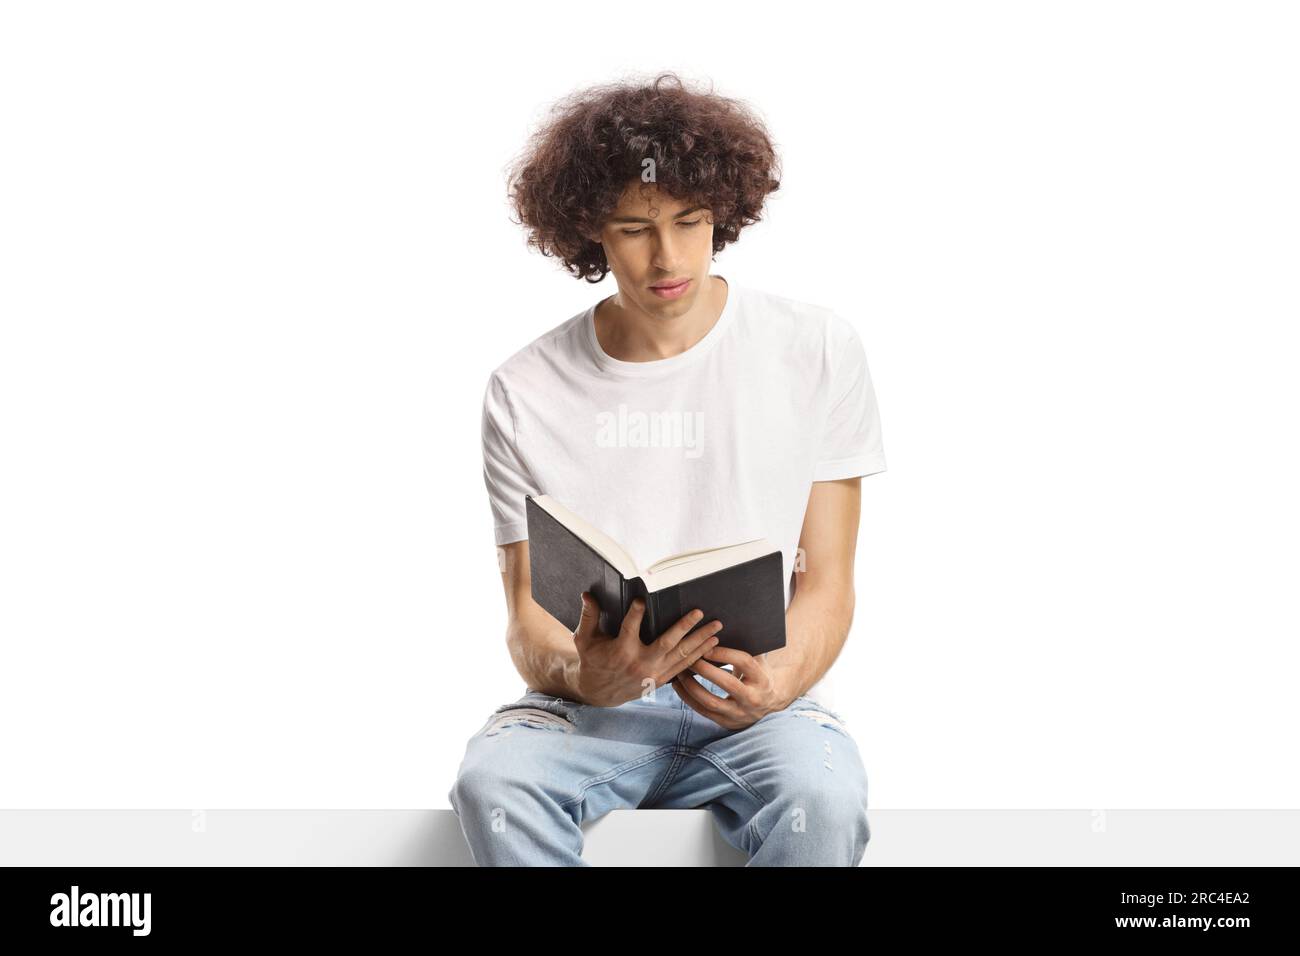 Young man with a curly hair sitting on a panel and reading a book isolated on white background Stock Photo